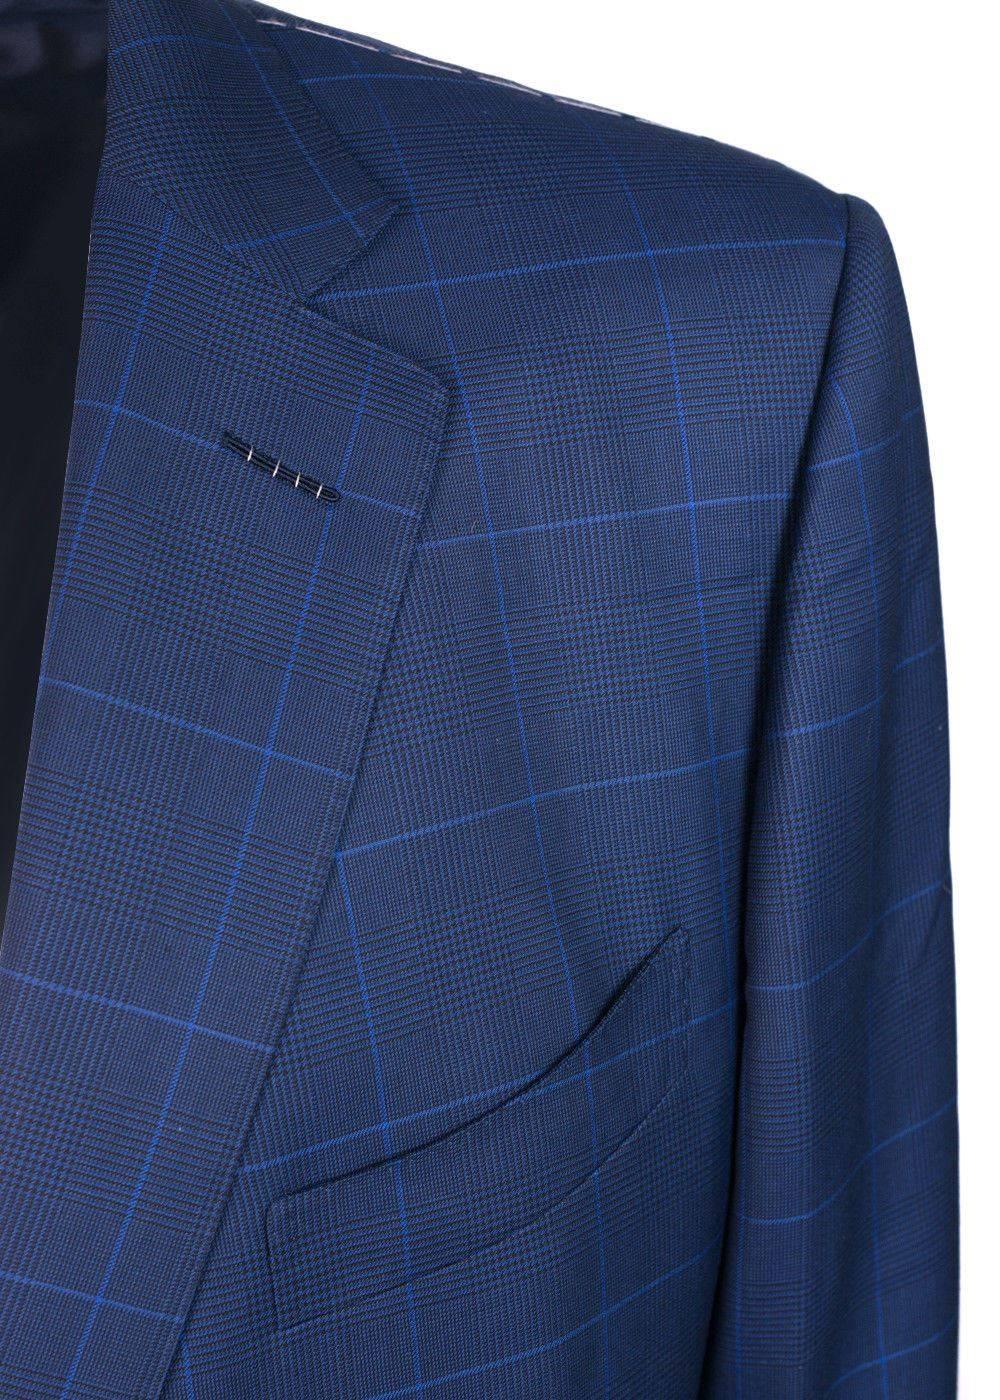 Brand New Tom Ford O'Connor 2 Piece Suit
Original Tags & Hanger Included
Retails in Stores & Online for $4250
Men's Size EUR 62 R / US 52 R Fits True to Size

Display your modern refinement in your plaid Tom Ford Suit. This O'Conner suit features a